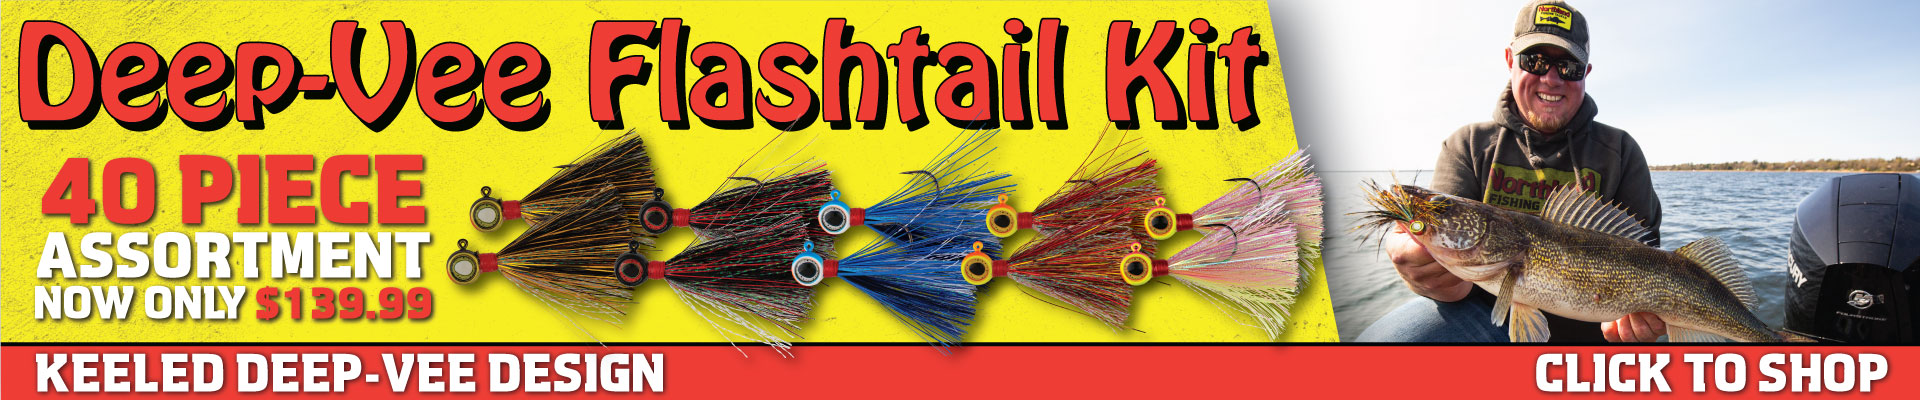 Northland Fishing Tackle Deep-Vee Flashtail Jig Kit, on sale now with FREE shipping.